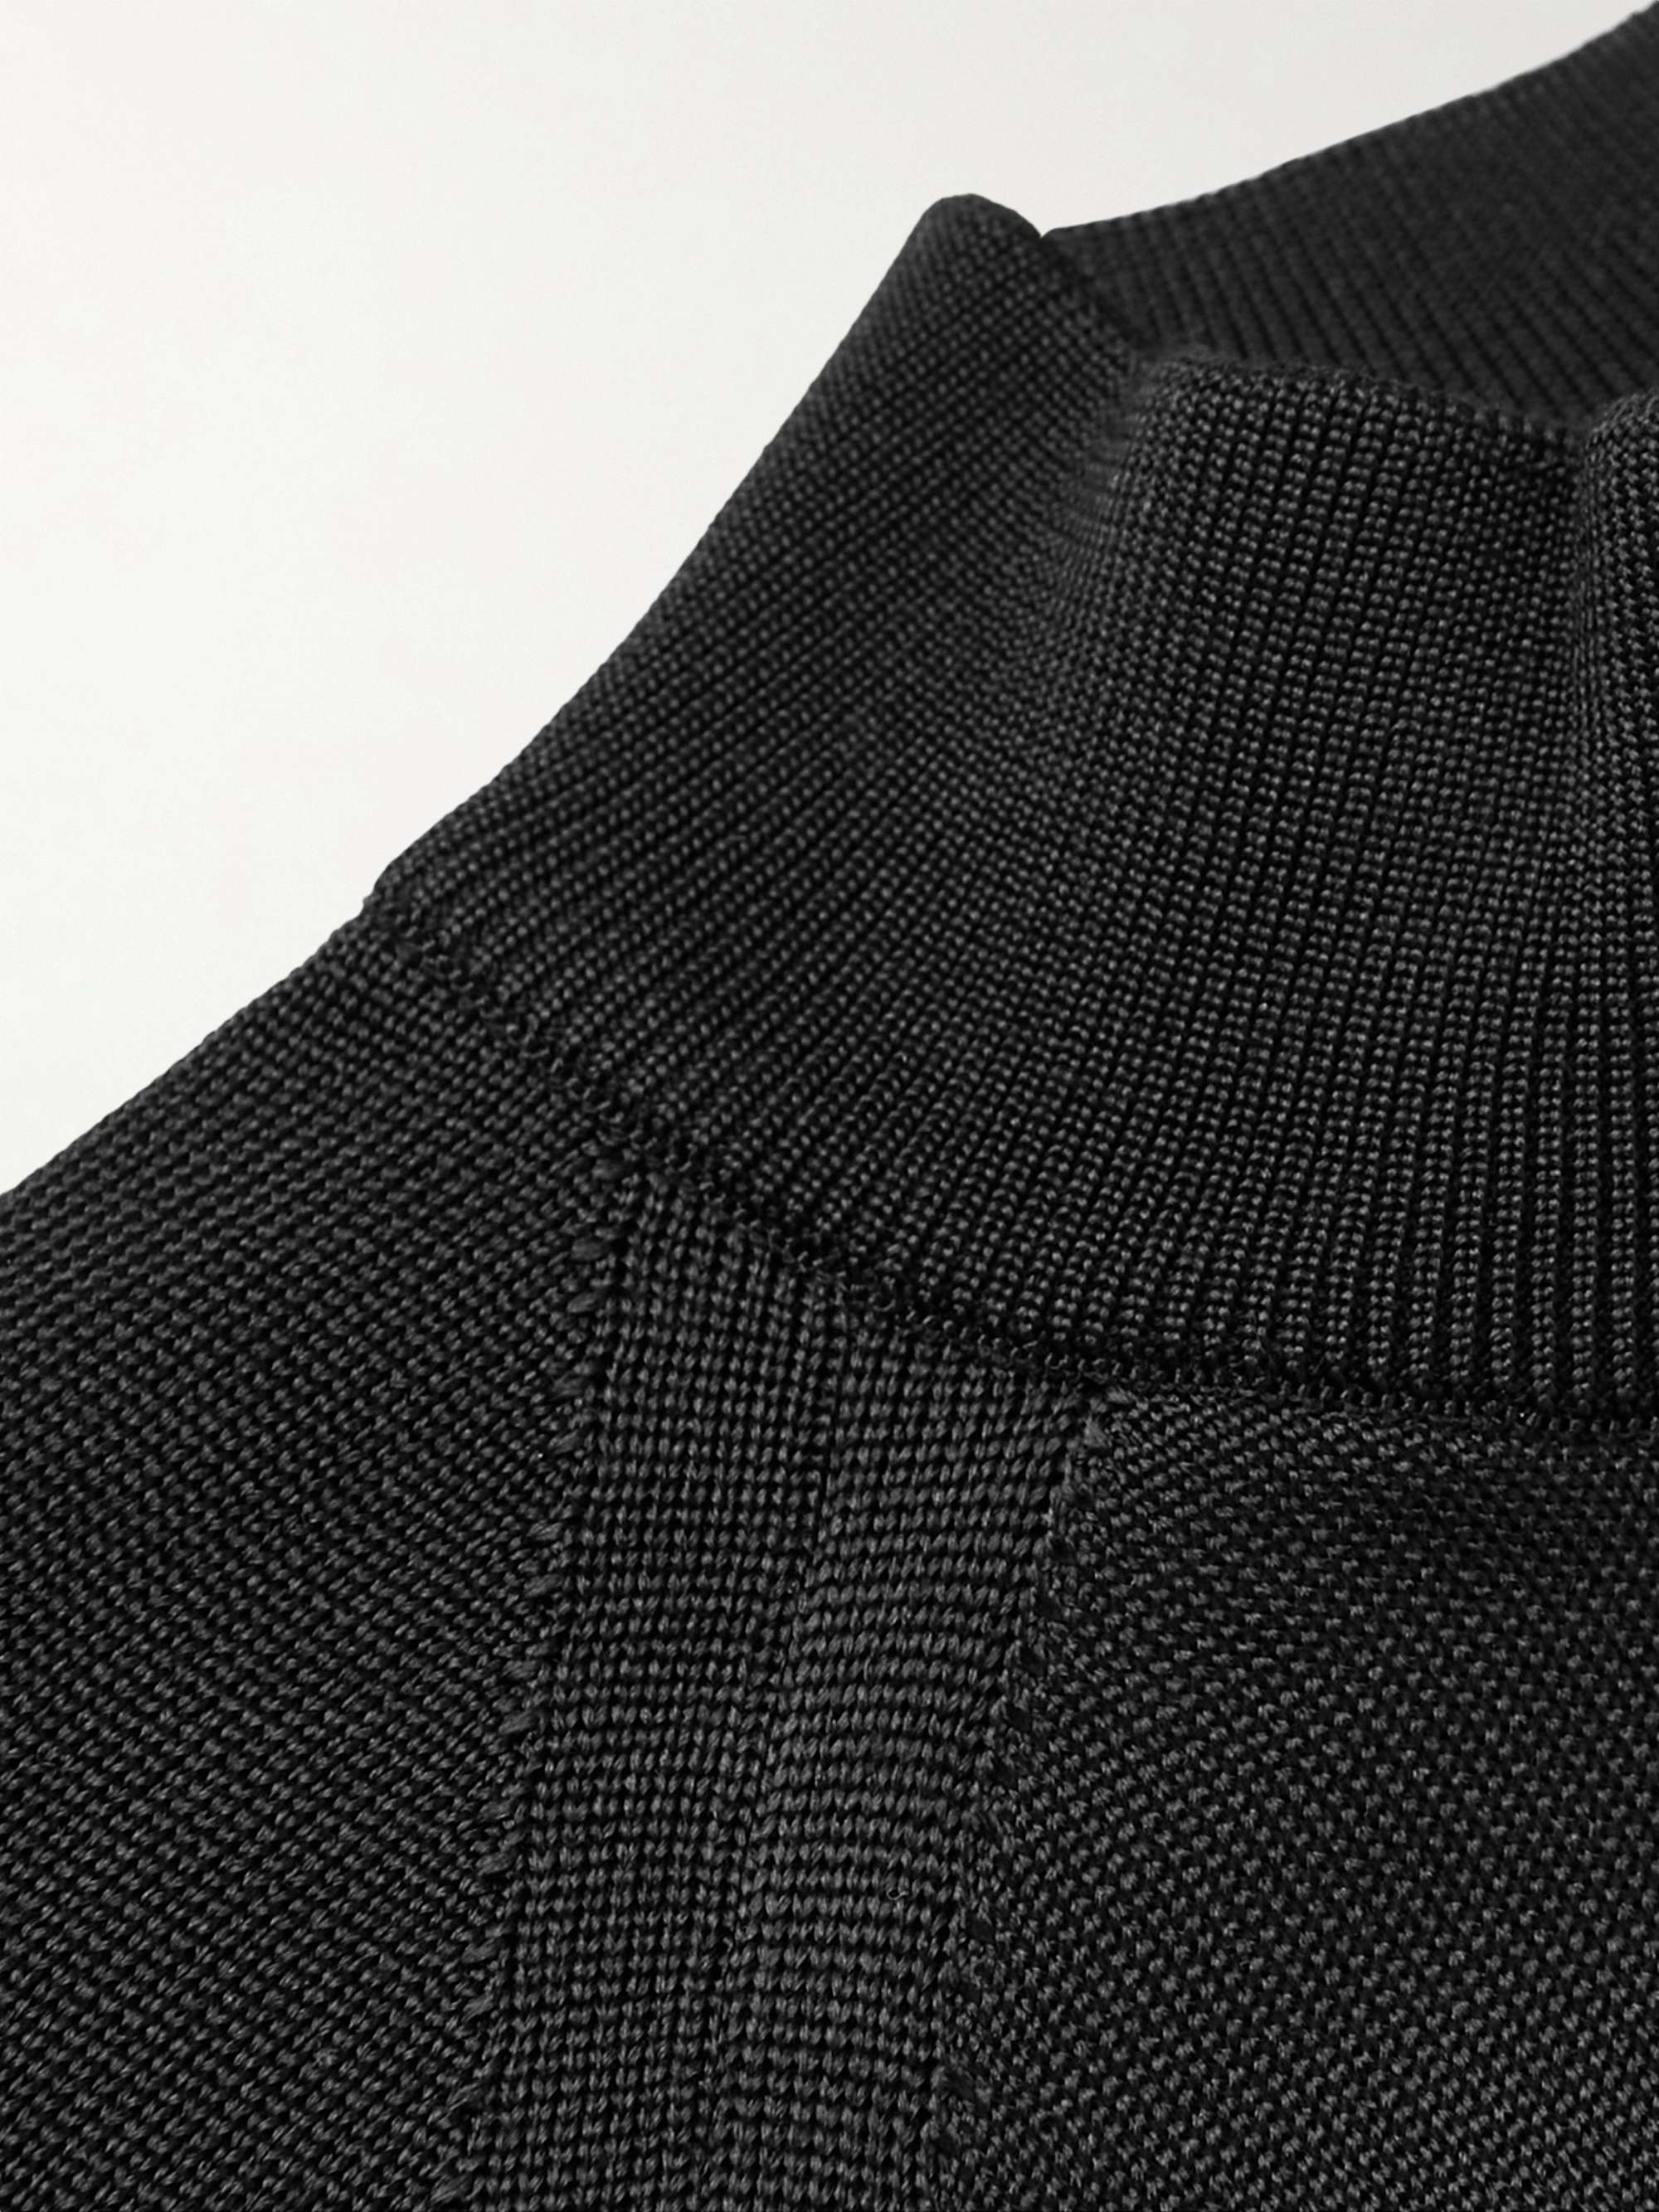 TOM FORD Silk and Merino Wool-Blend Mock-Neck Sweater